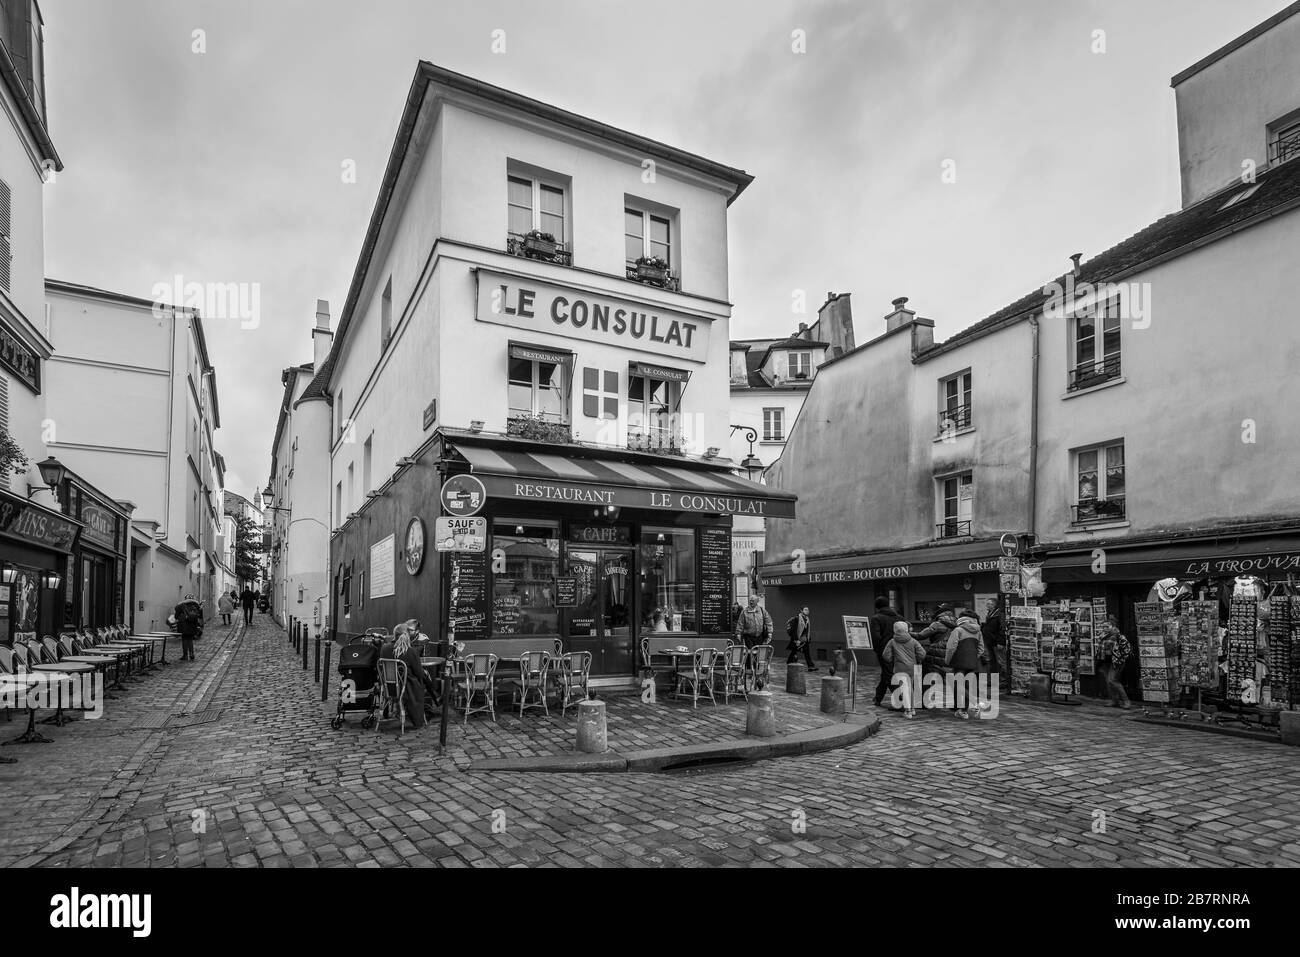 Paris, France - December 24, 2018: Exterior of La Consulat restaurant in Montmartre, Paris, France. Black and white photography. Architecture and land Stock Photo